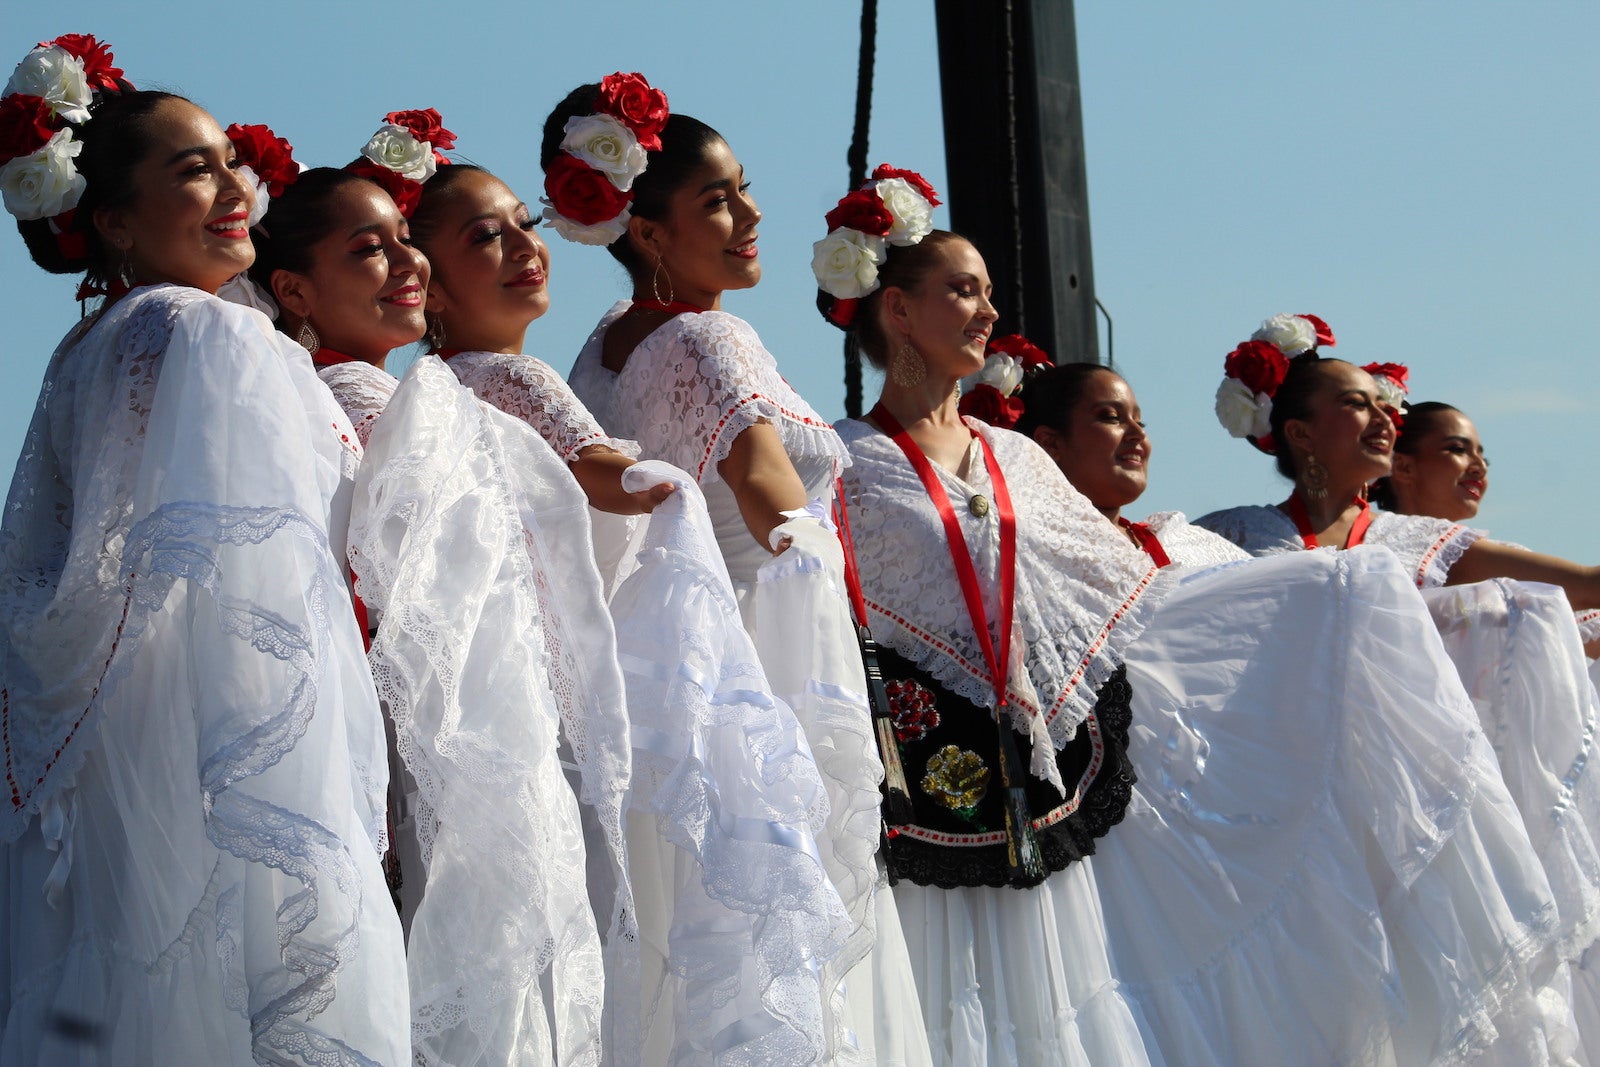 Mexican Independence Day Festival celebrated at Penn’s Landing WHYY